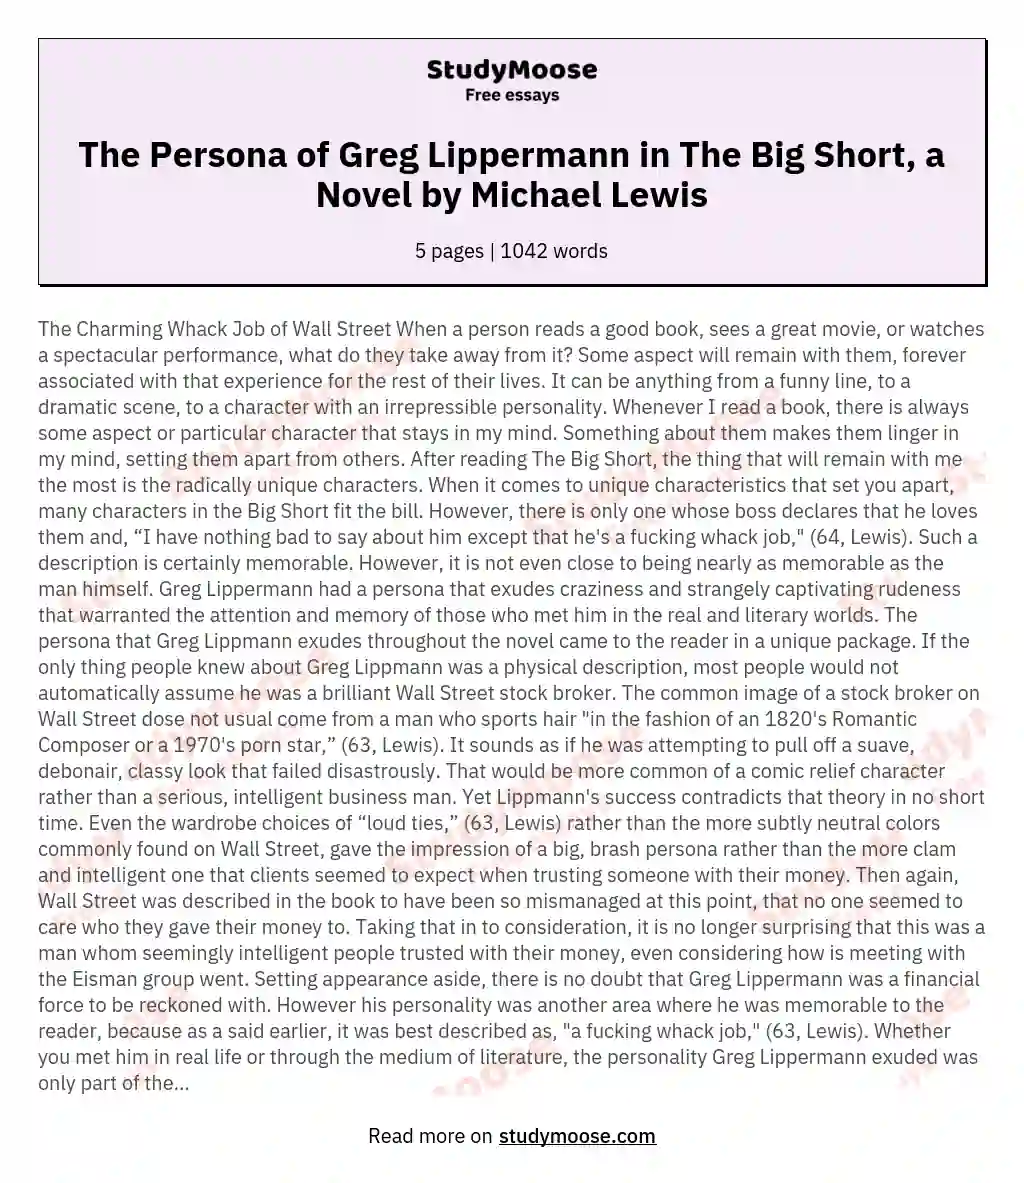 The Persona of Greg Lippermann in The Big Short, a Novel by Michael Lewis essay